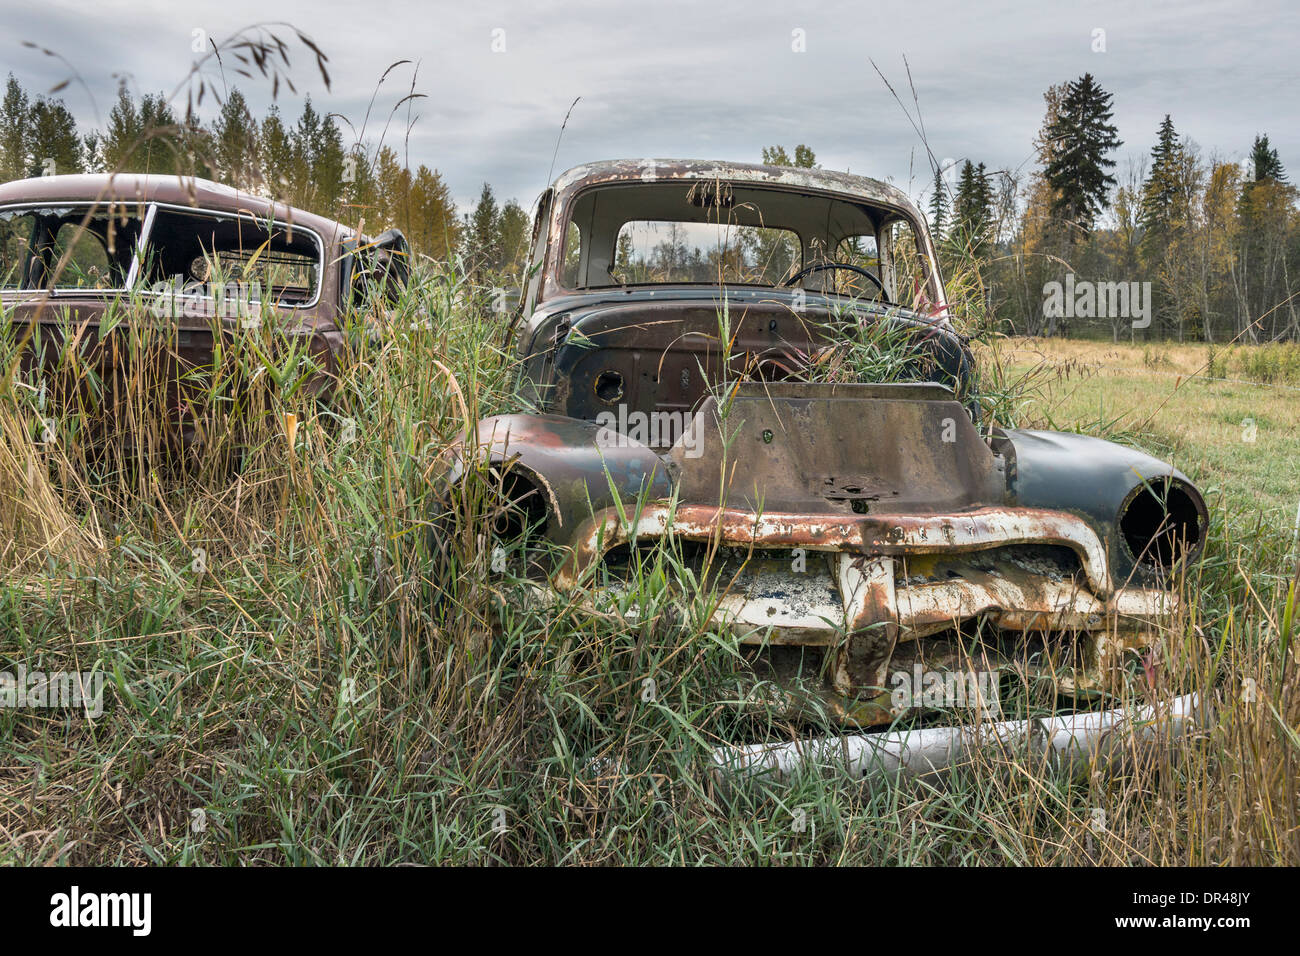 Abandoned old Chevy truck and car on a farm near Likely, Cariboo-Chilcotin region, British Columbia Stock Photo